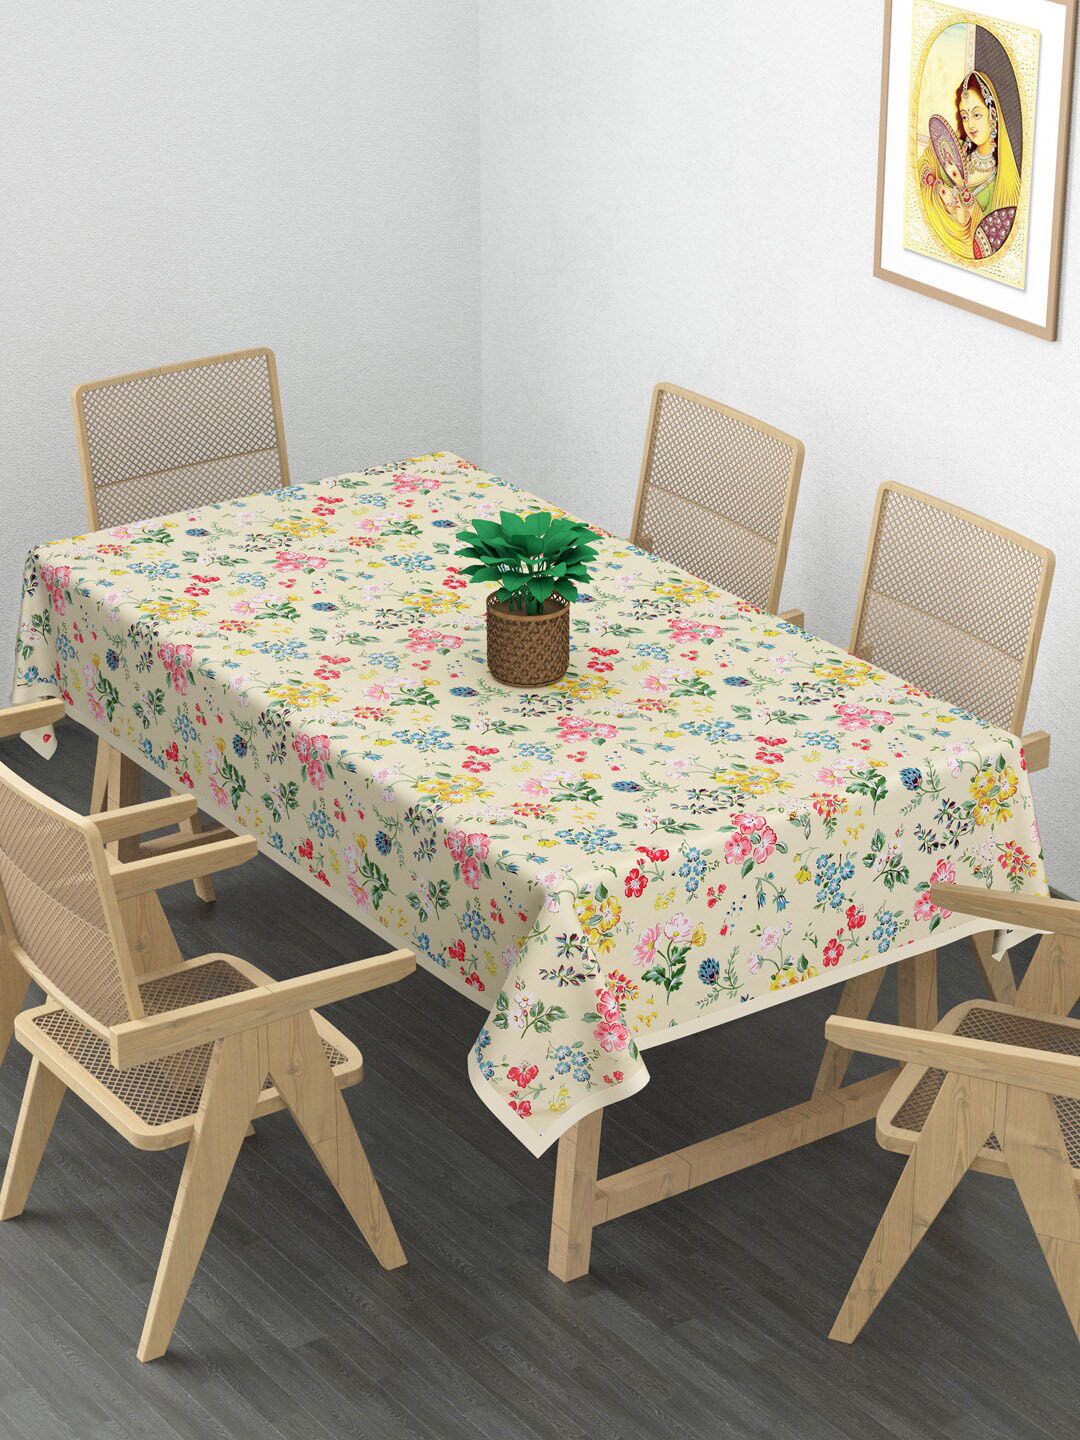 Gulaab Jaipur Printed Cotton 6-Seater Table Cover Price in India